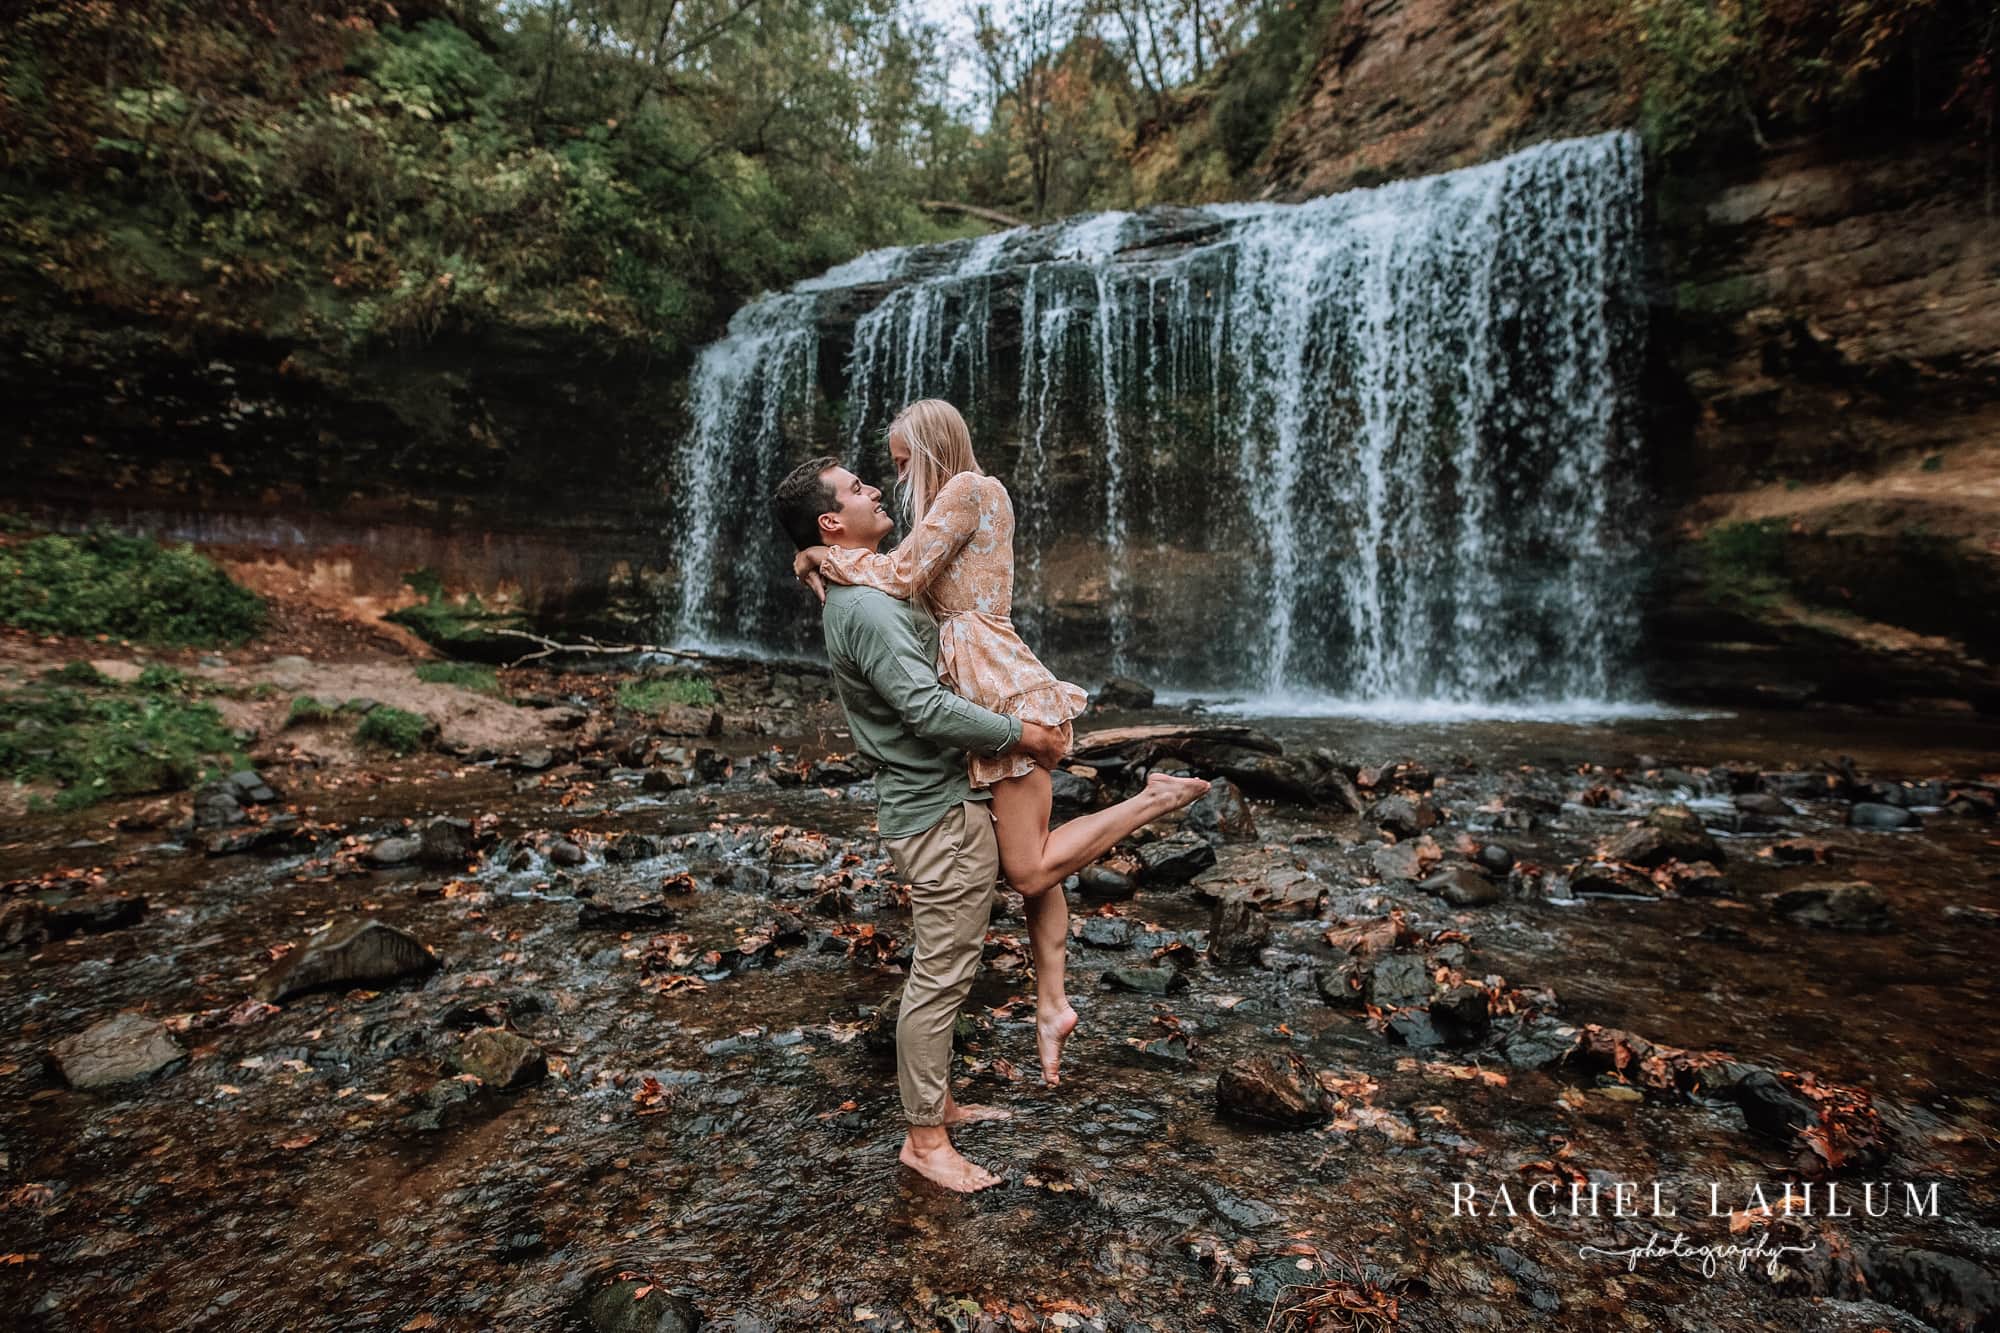 Man lifts up woman in front of waterfall at Cascade Falls in Osceola, WI.